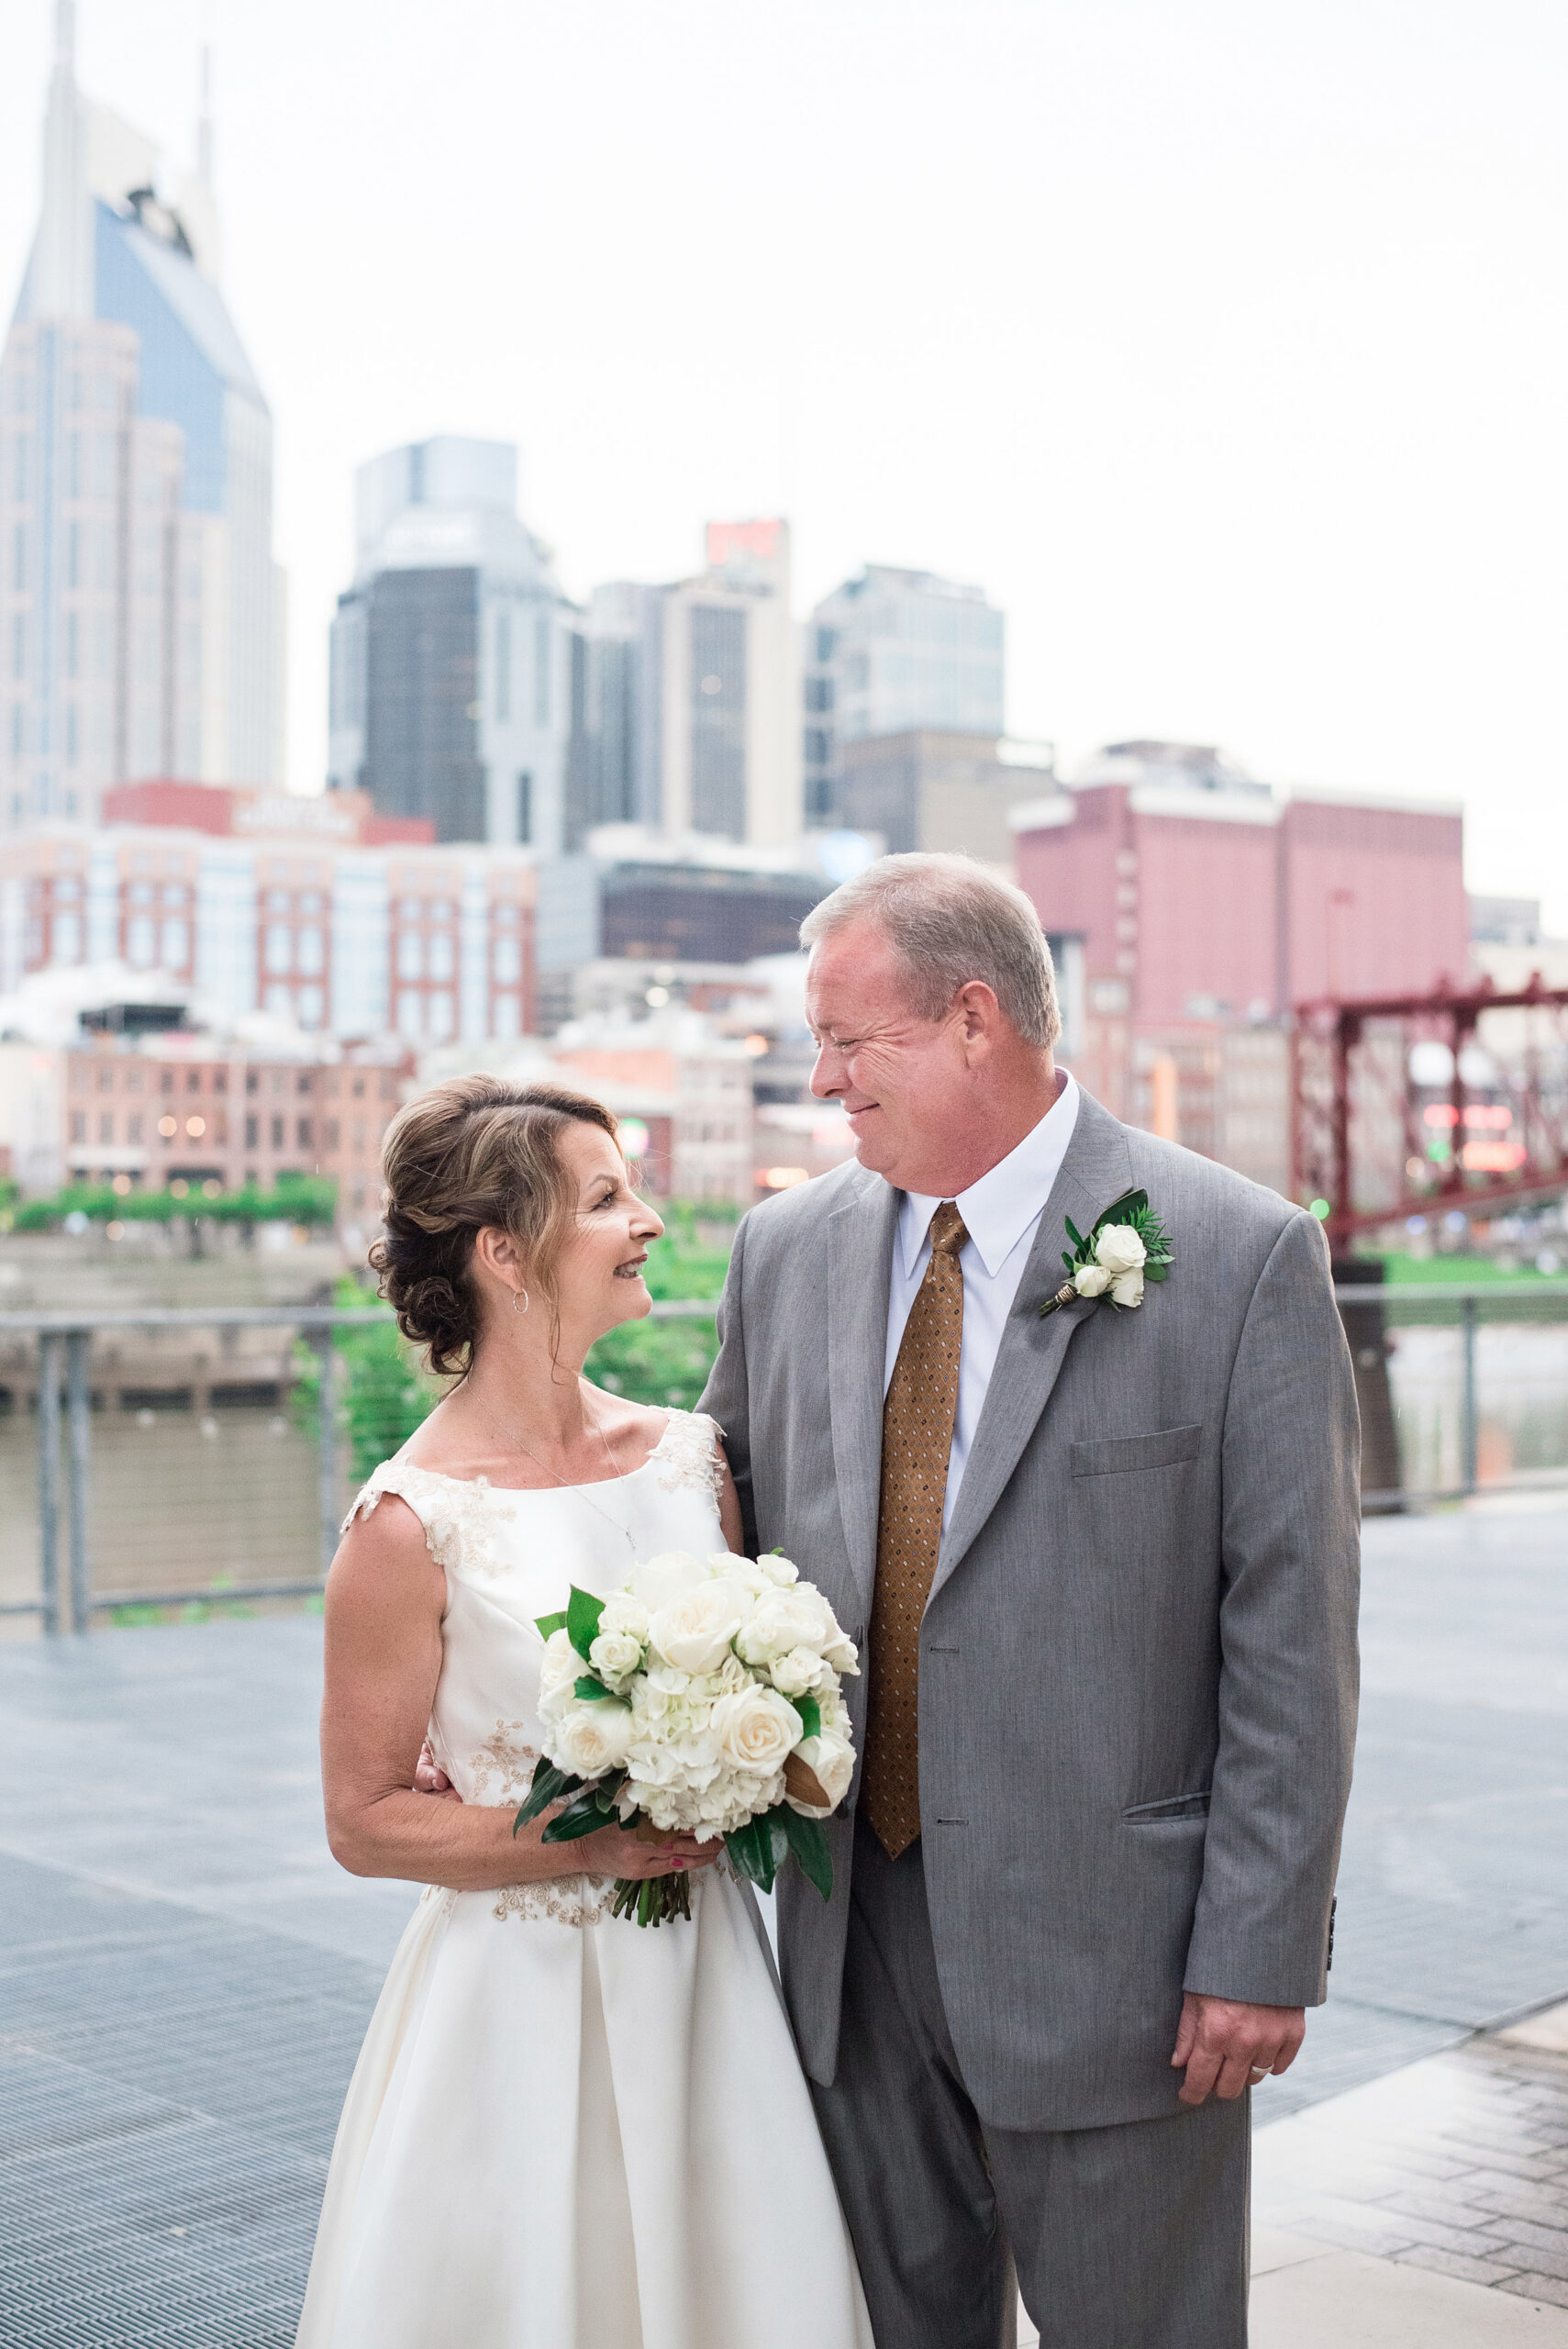 The bride, wearing a tea length white wedding dress with lacy floral accents holds a large white bouquet of roses and hydrangea. She is smiling up at the groom who is wearing a gray suit with a white shirt and brown tie. He has a white boutonniere pinned to his lapel. He is smiling down at the bride. The Cumberland River and Nashville skyline are in the background behind them. 